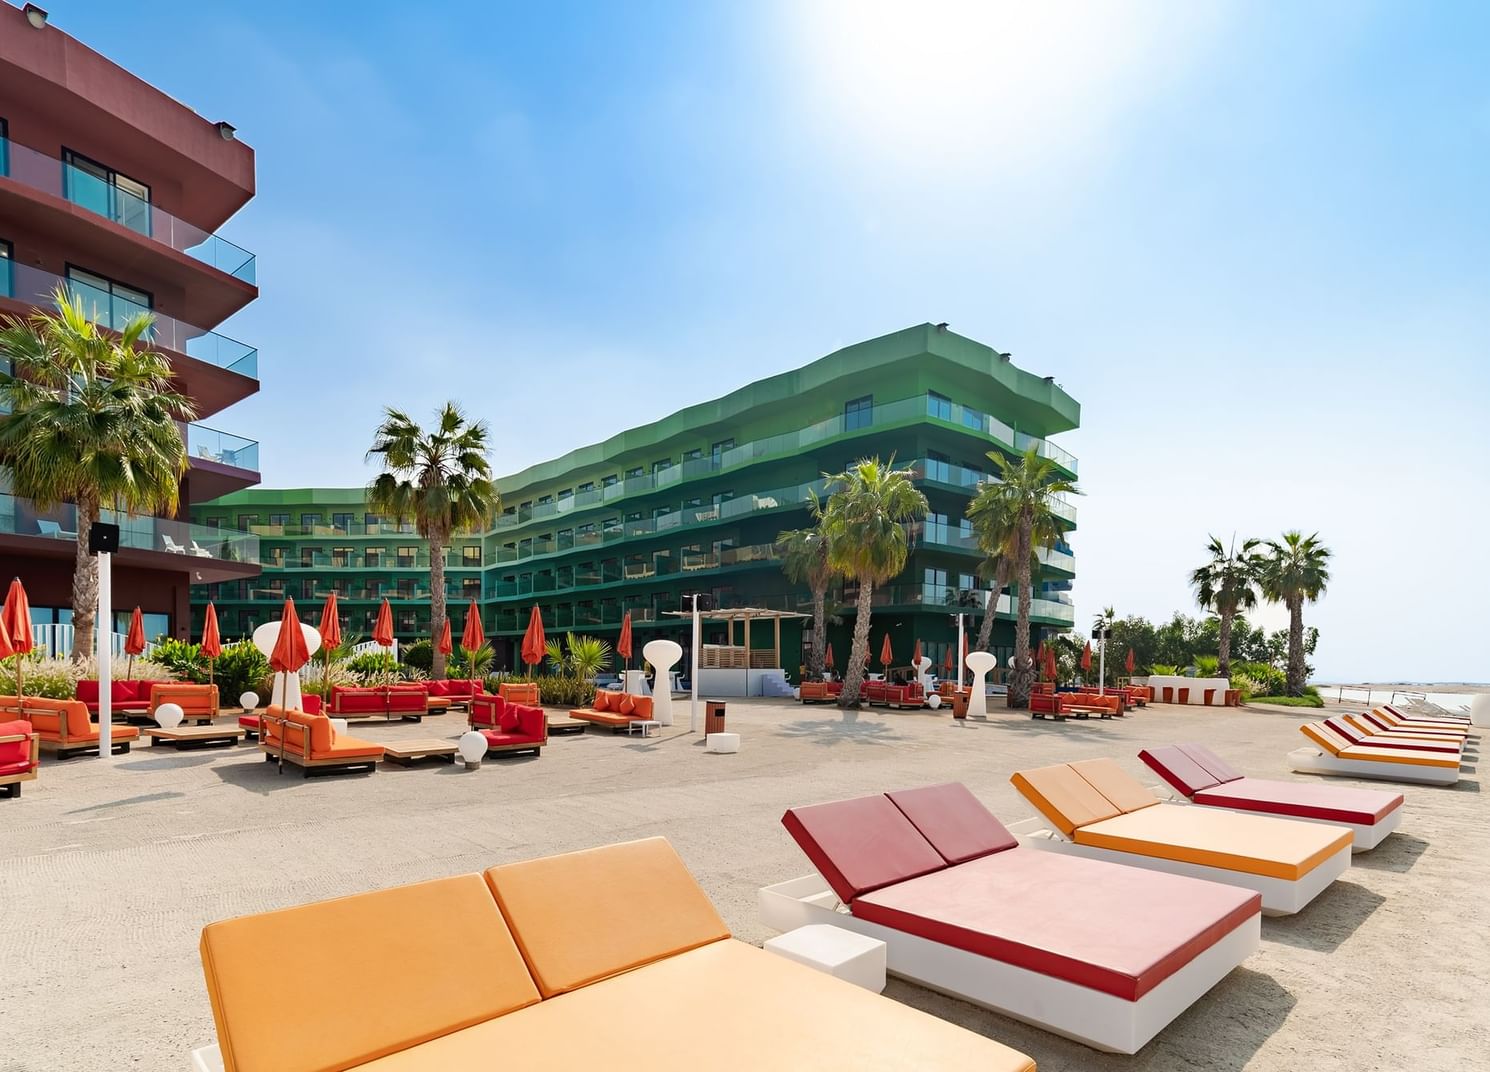 Hotel exterior, outdoor seating, palm trees & sun loungers facing the beach at Côte d'Azur Resort